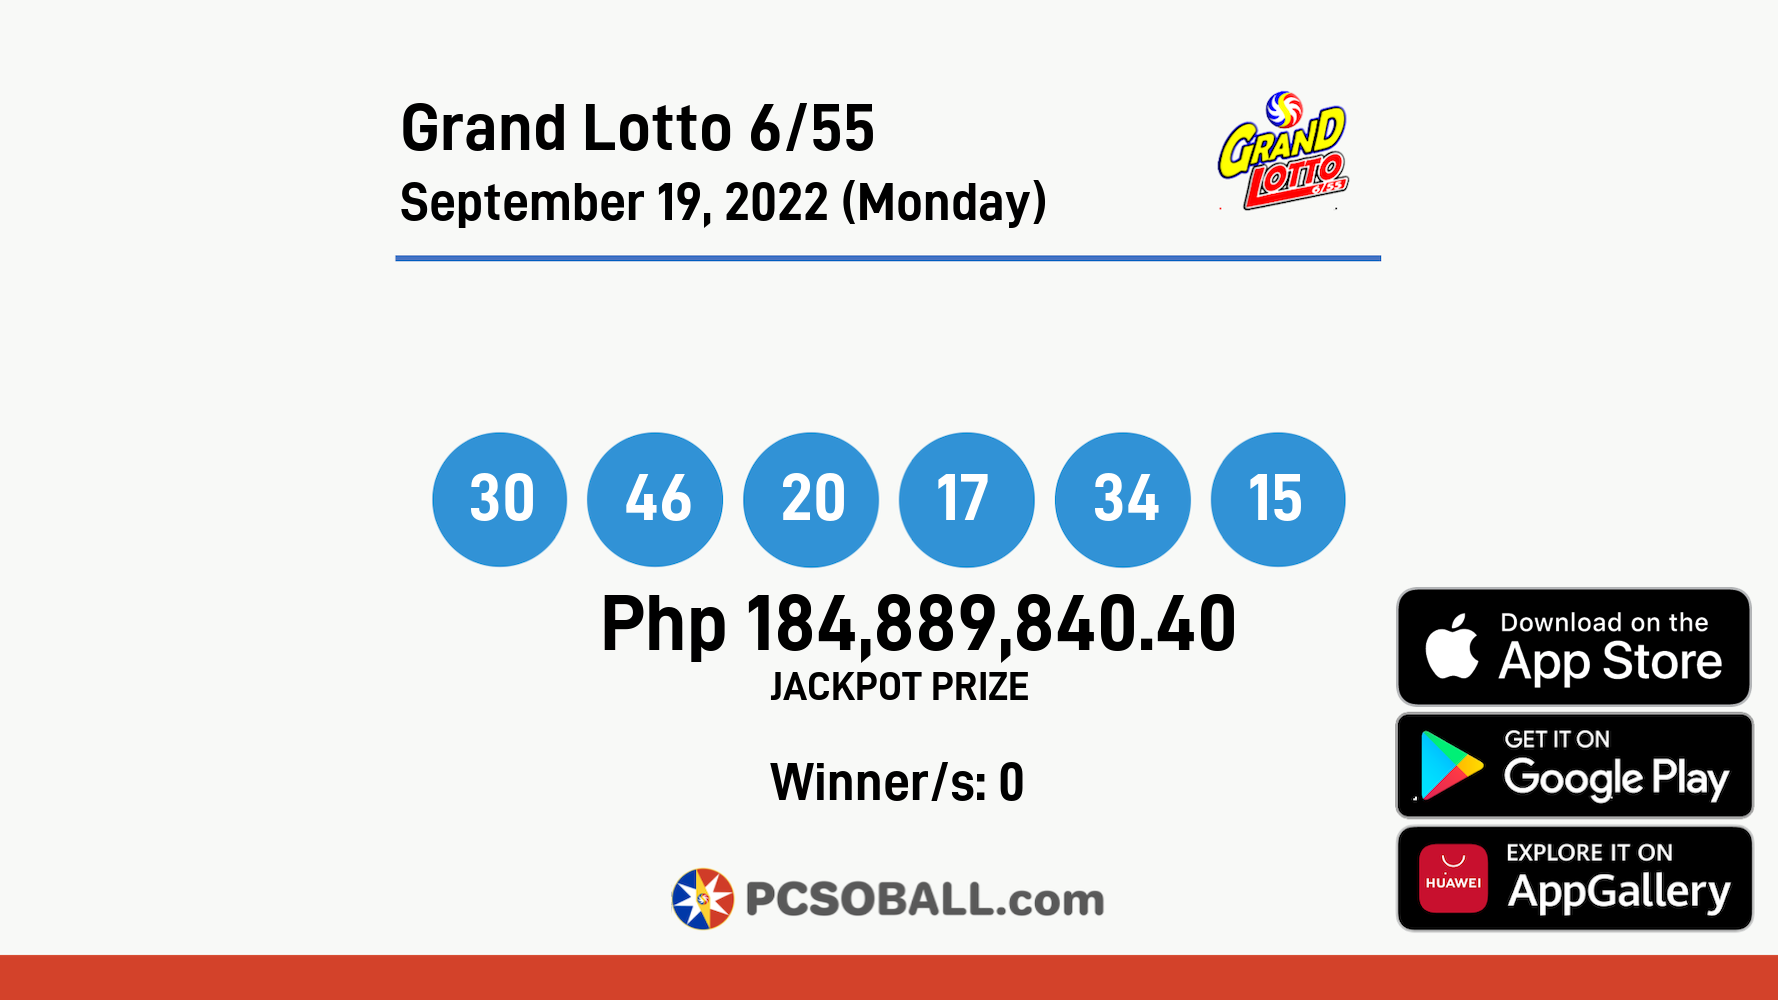 Grand Lotto 6/55 September 19, 2022 (Monday) Result